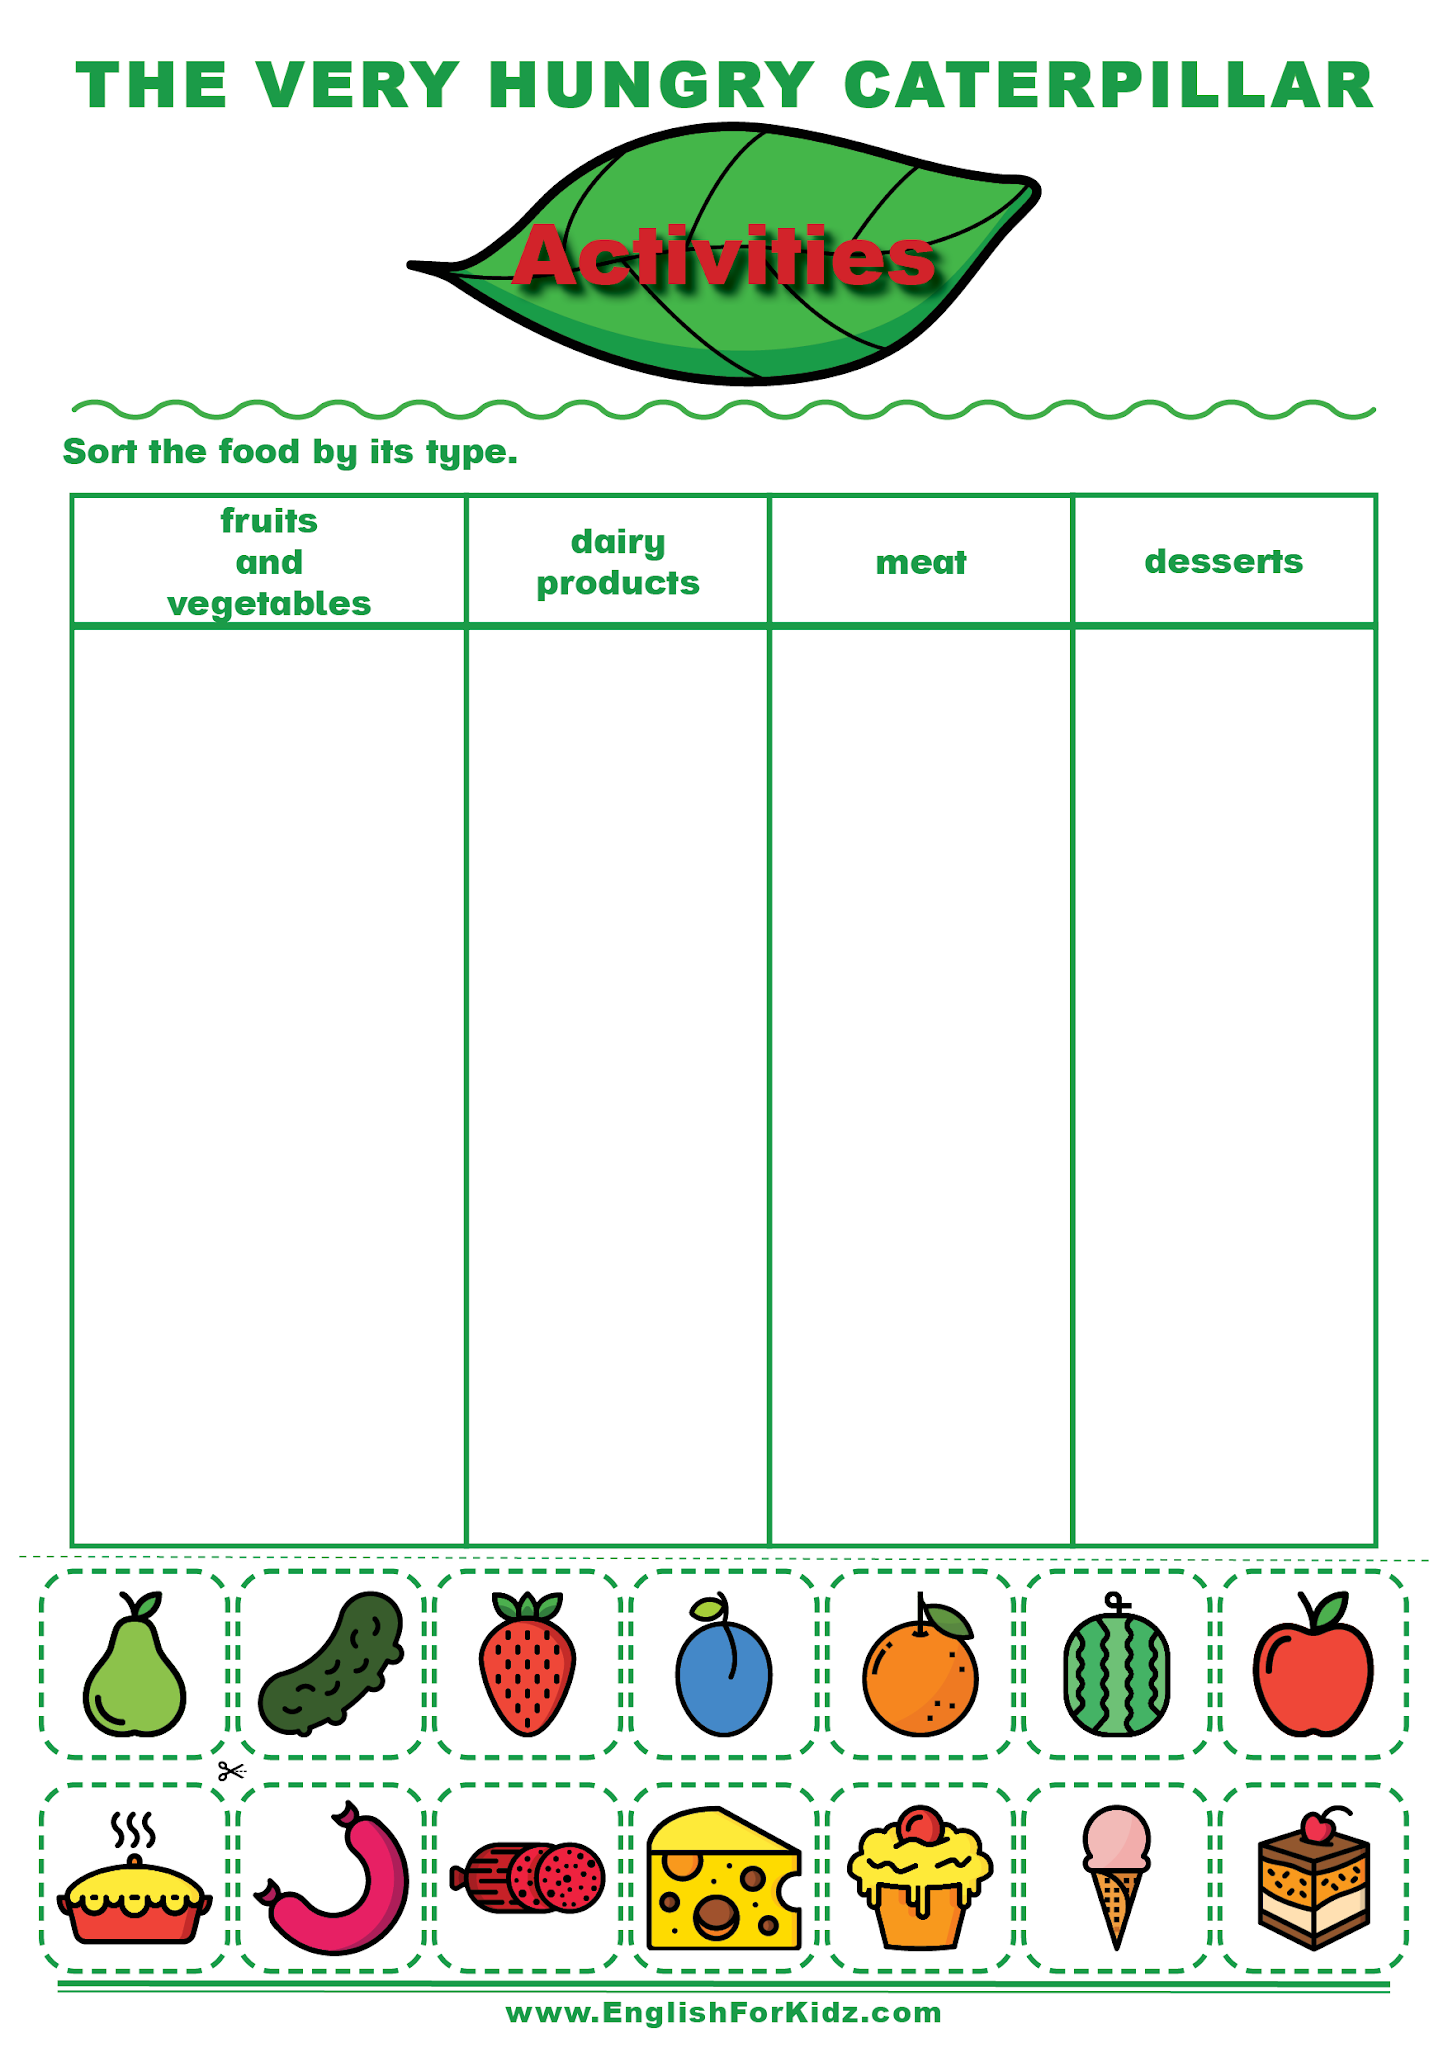 the very hungry caterpillar printable book